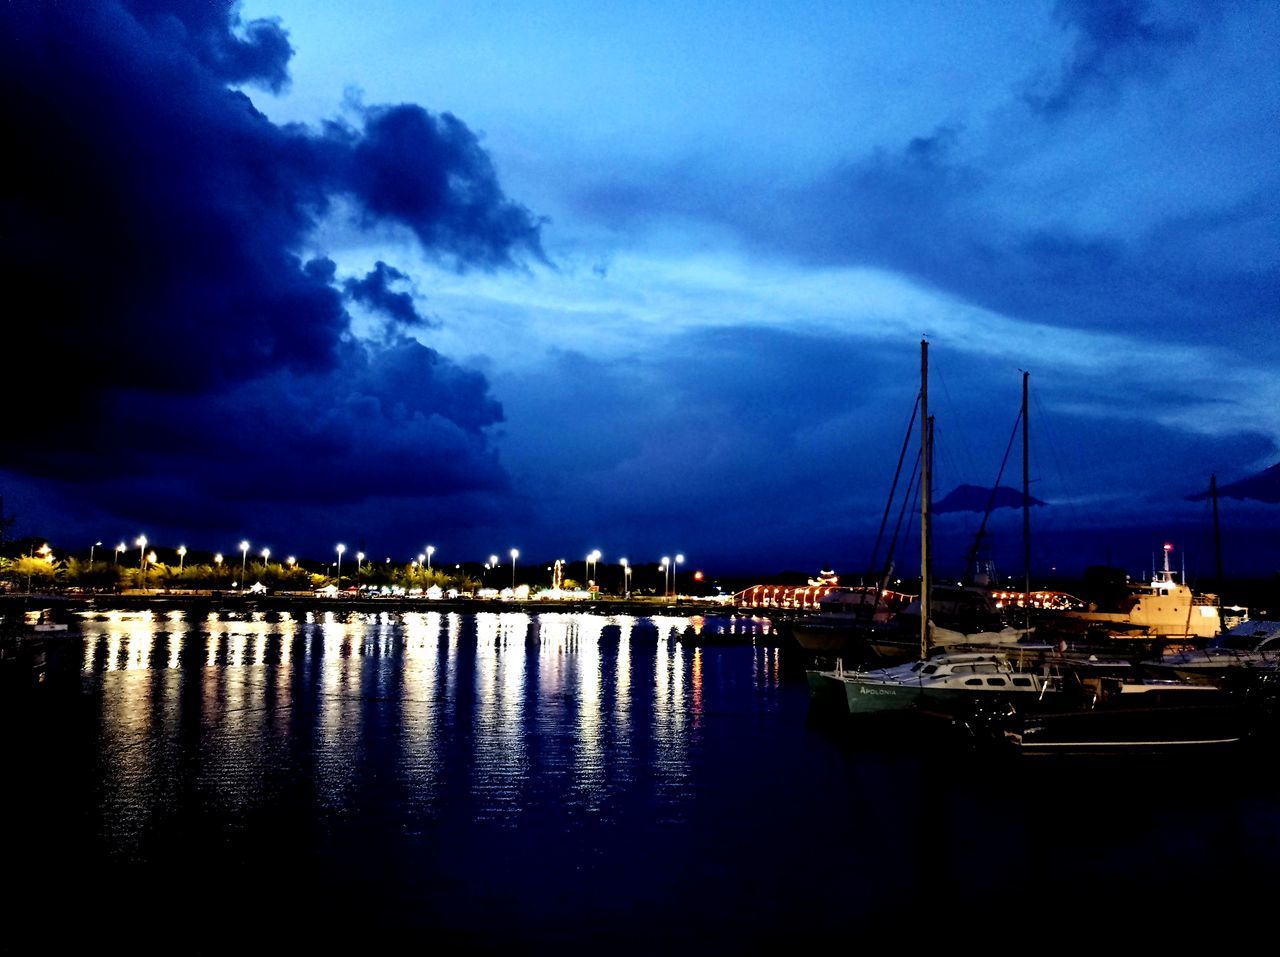 water, sky, cloud, nautical vessel, dusk, reflection, night, evening, transportation, sea, nature, sailboat, mode of transportation, illuminated, architecture, harbor, no people, beauty in nature, cityscape, travel destinations, horizon, moored, ship, city, marina, scenics - nature, outdoors, travel, built structure, dock, tranquility, dramatic sky, building exterior, sunset, yacht, sailing, blue